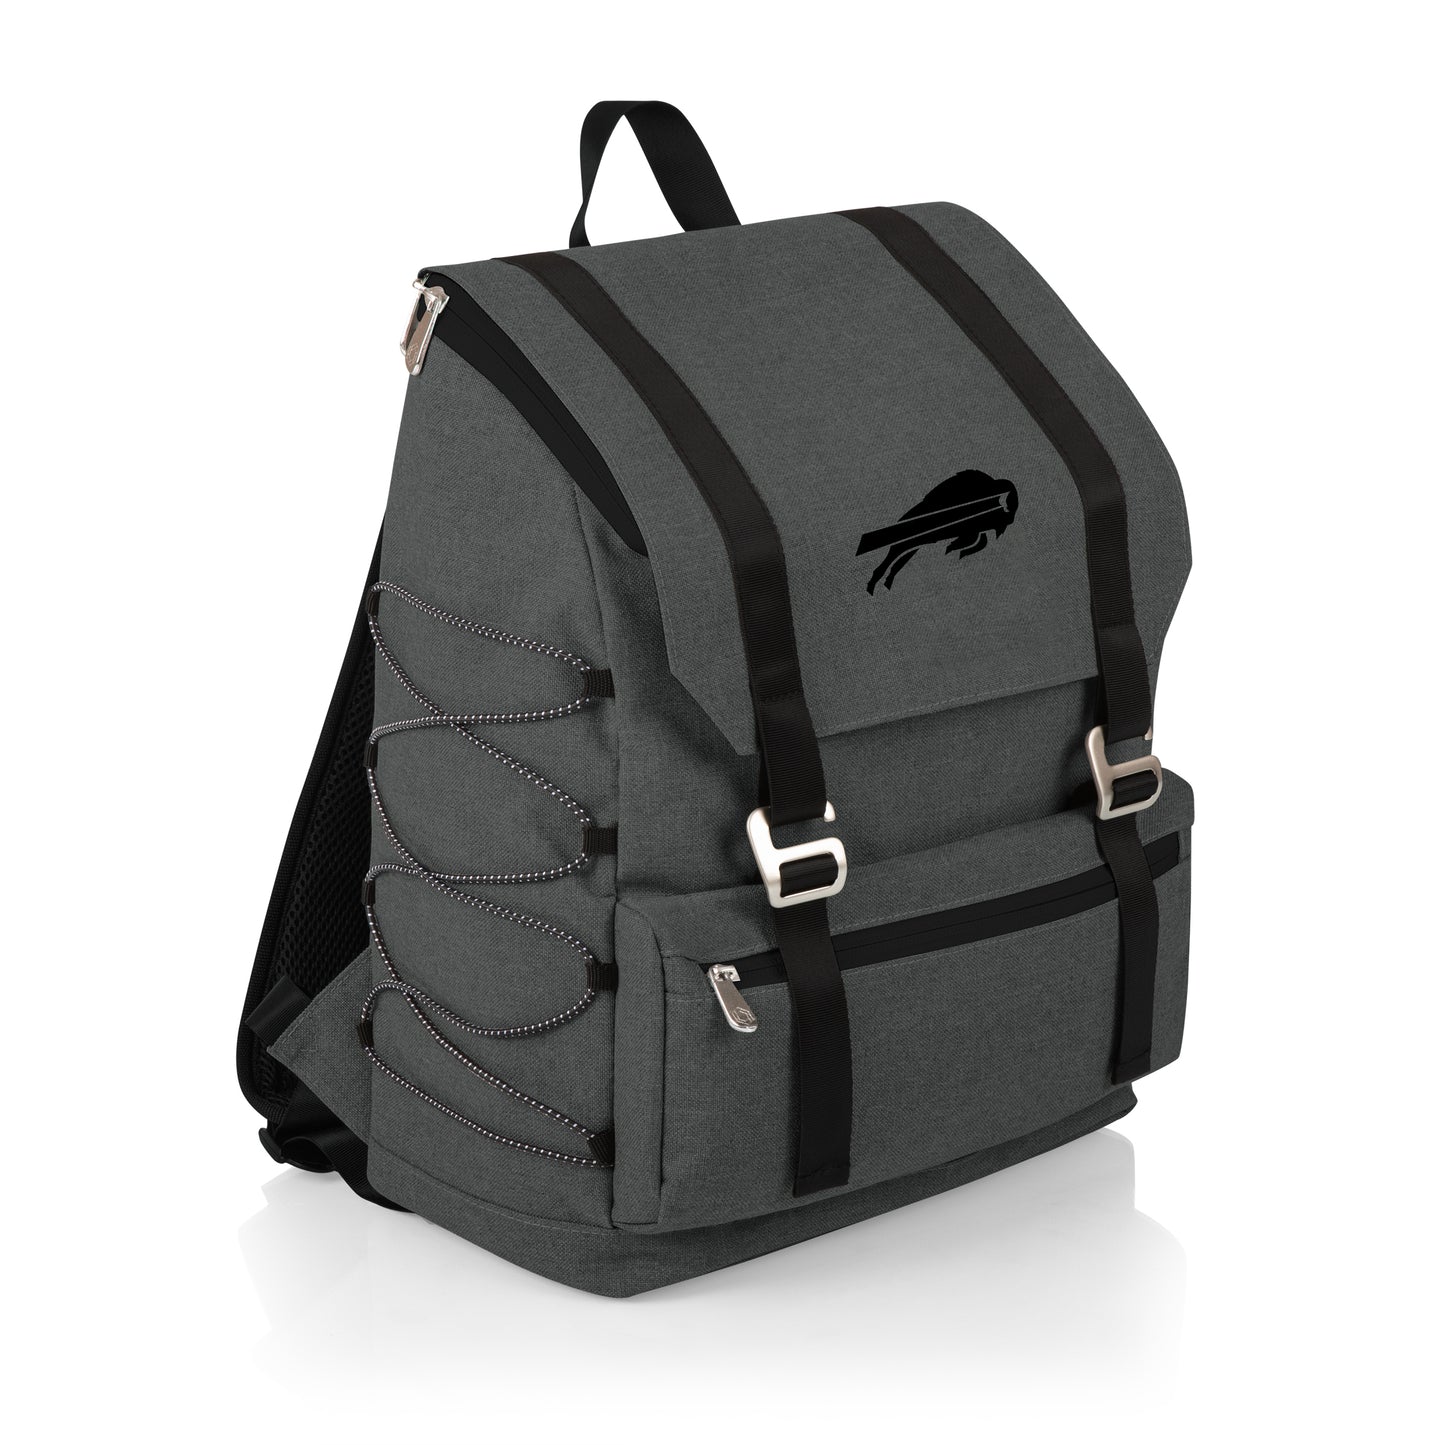 Buffalo Bills - On The Go Traverse Cooler Backpack